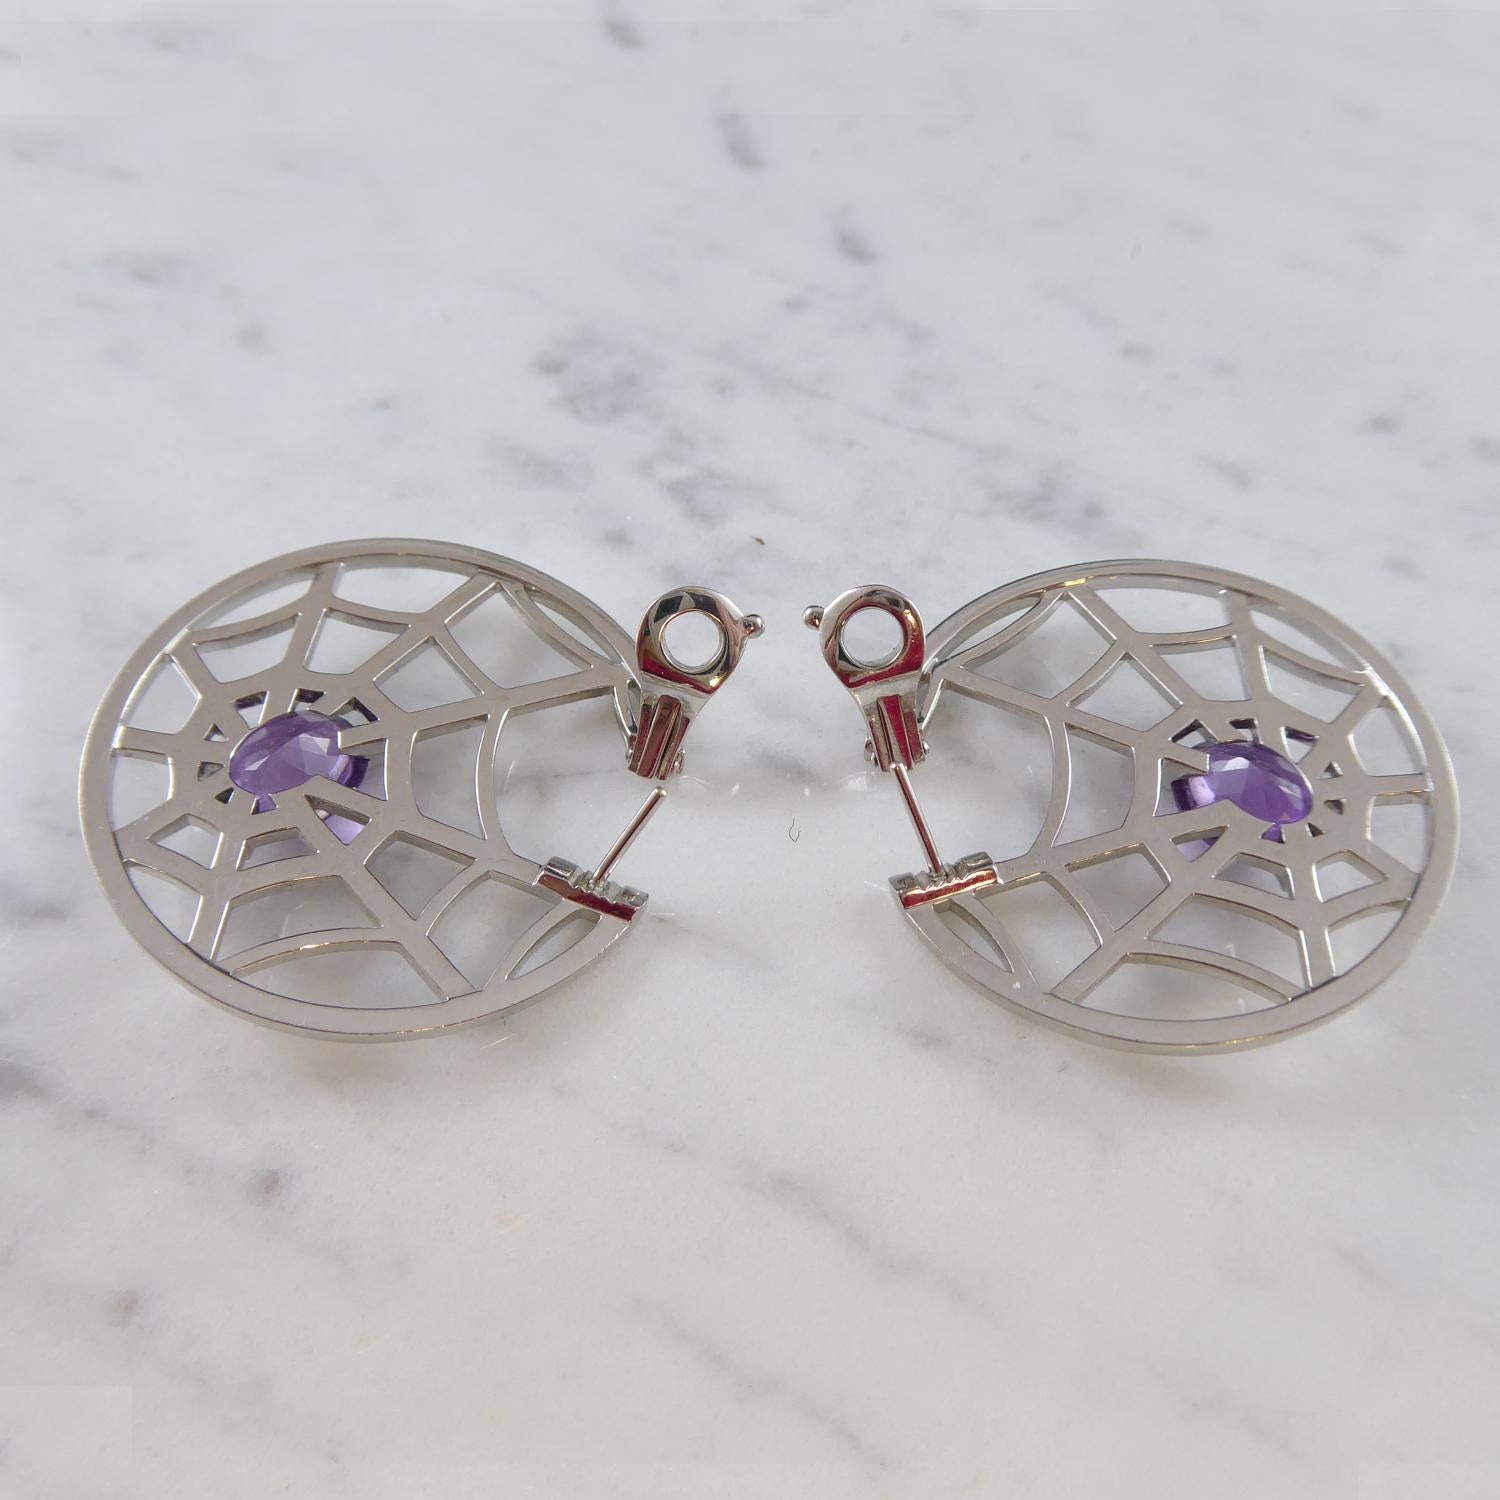 Chaumet Attrape-Moi Earrings, Diamond Set Spider's Web with Amethyst Spider 3